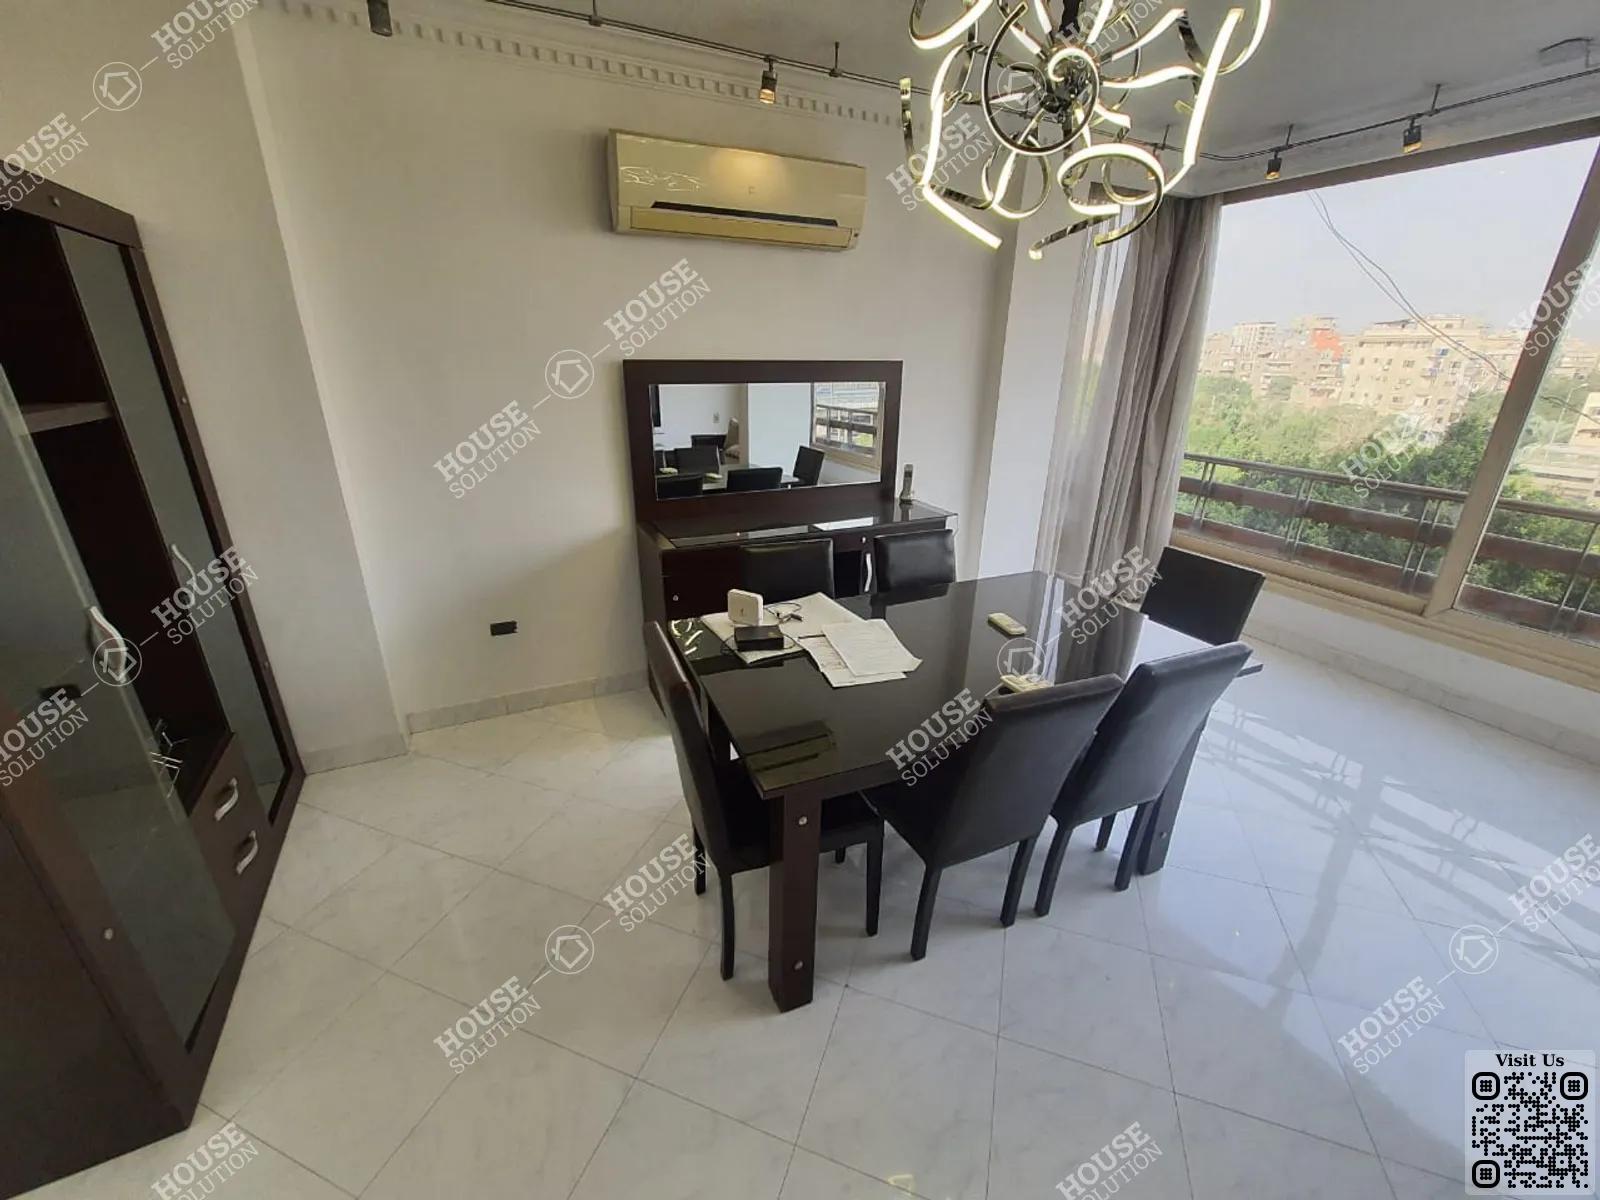 DINING AREA @ Apartments For Rent In Maadi Maadi Sarayat Area: 200 m² consists of 3 Bedrooms 2 Bathrooms Modern furnished 5 stars #4795-2